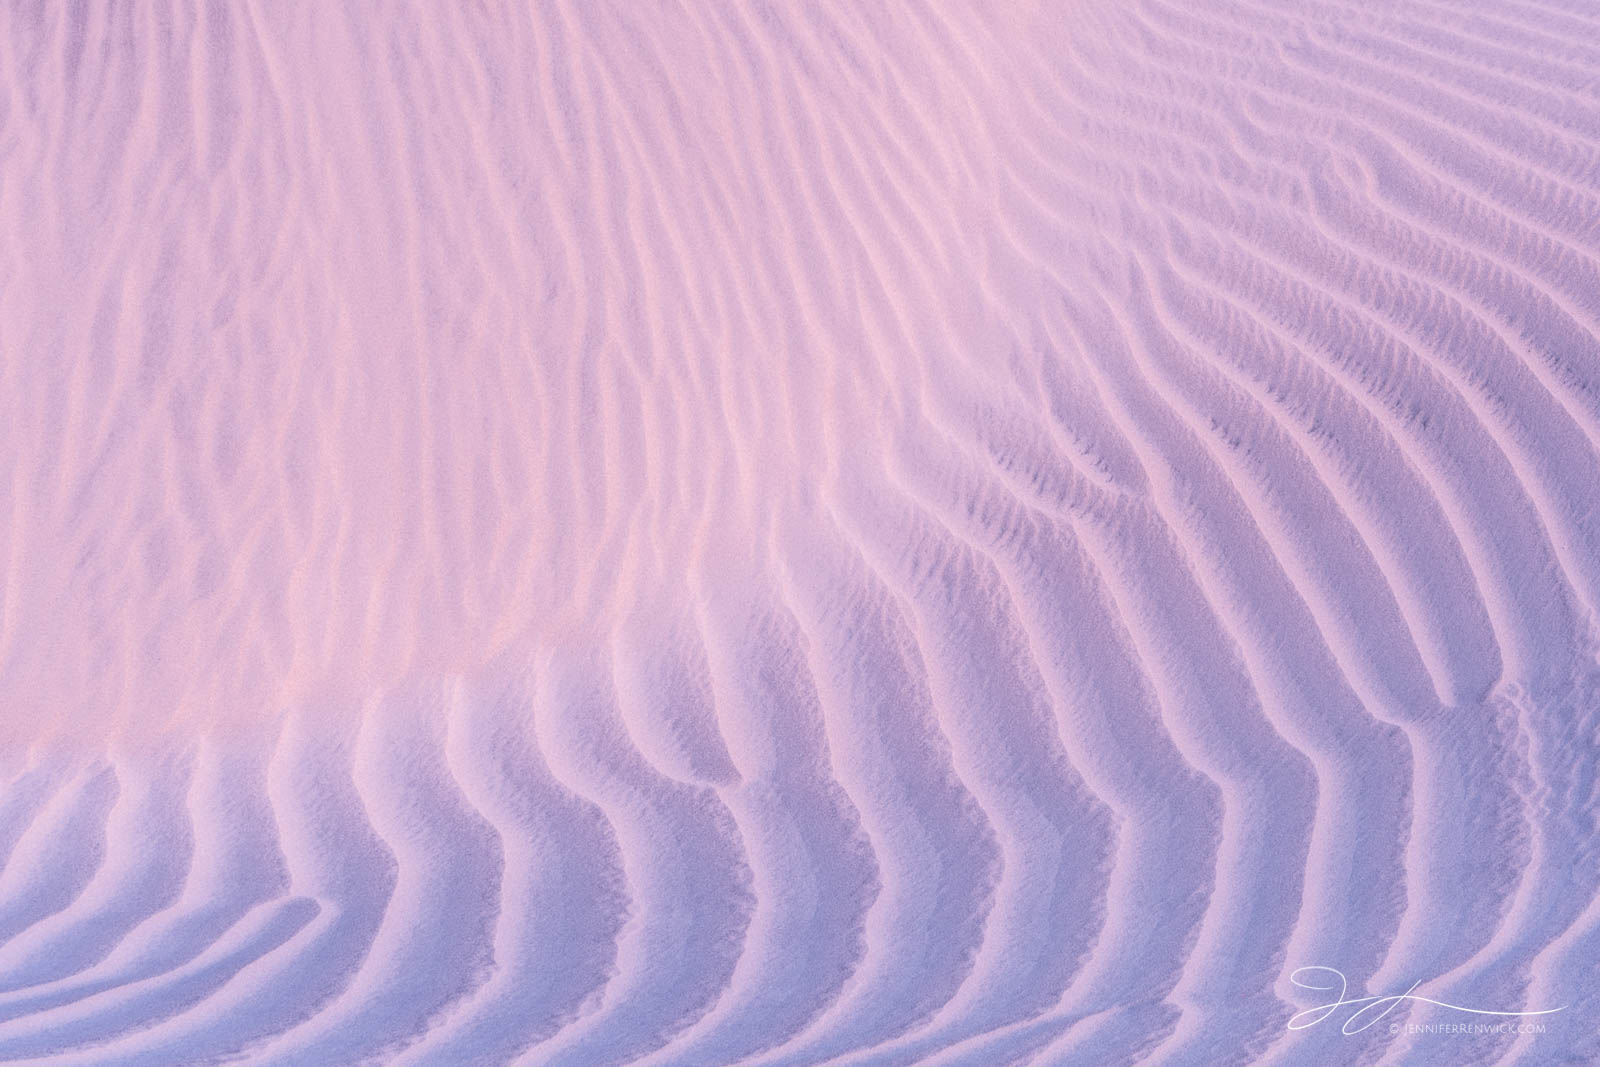 Sand textures create a "wave" on the side of a sand dune.